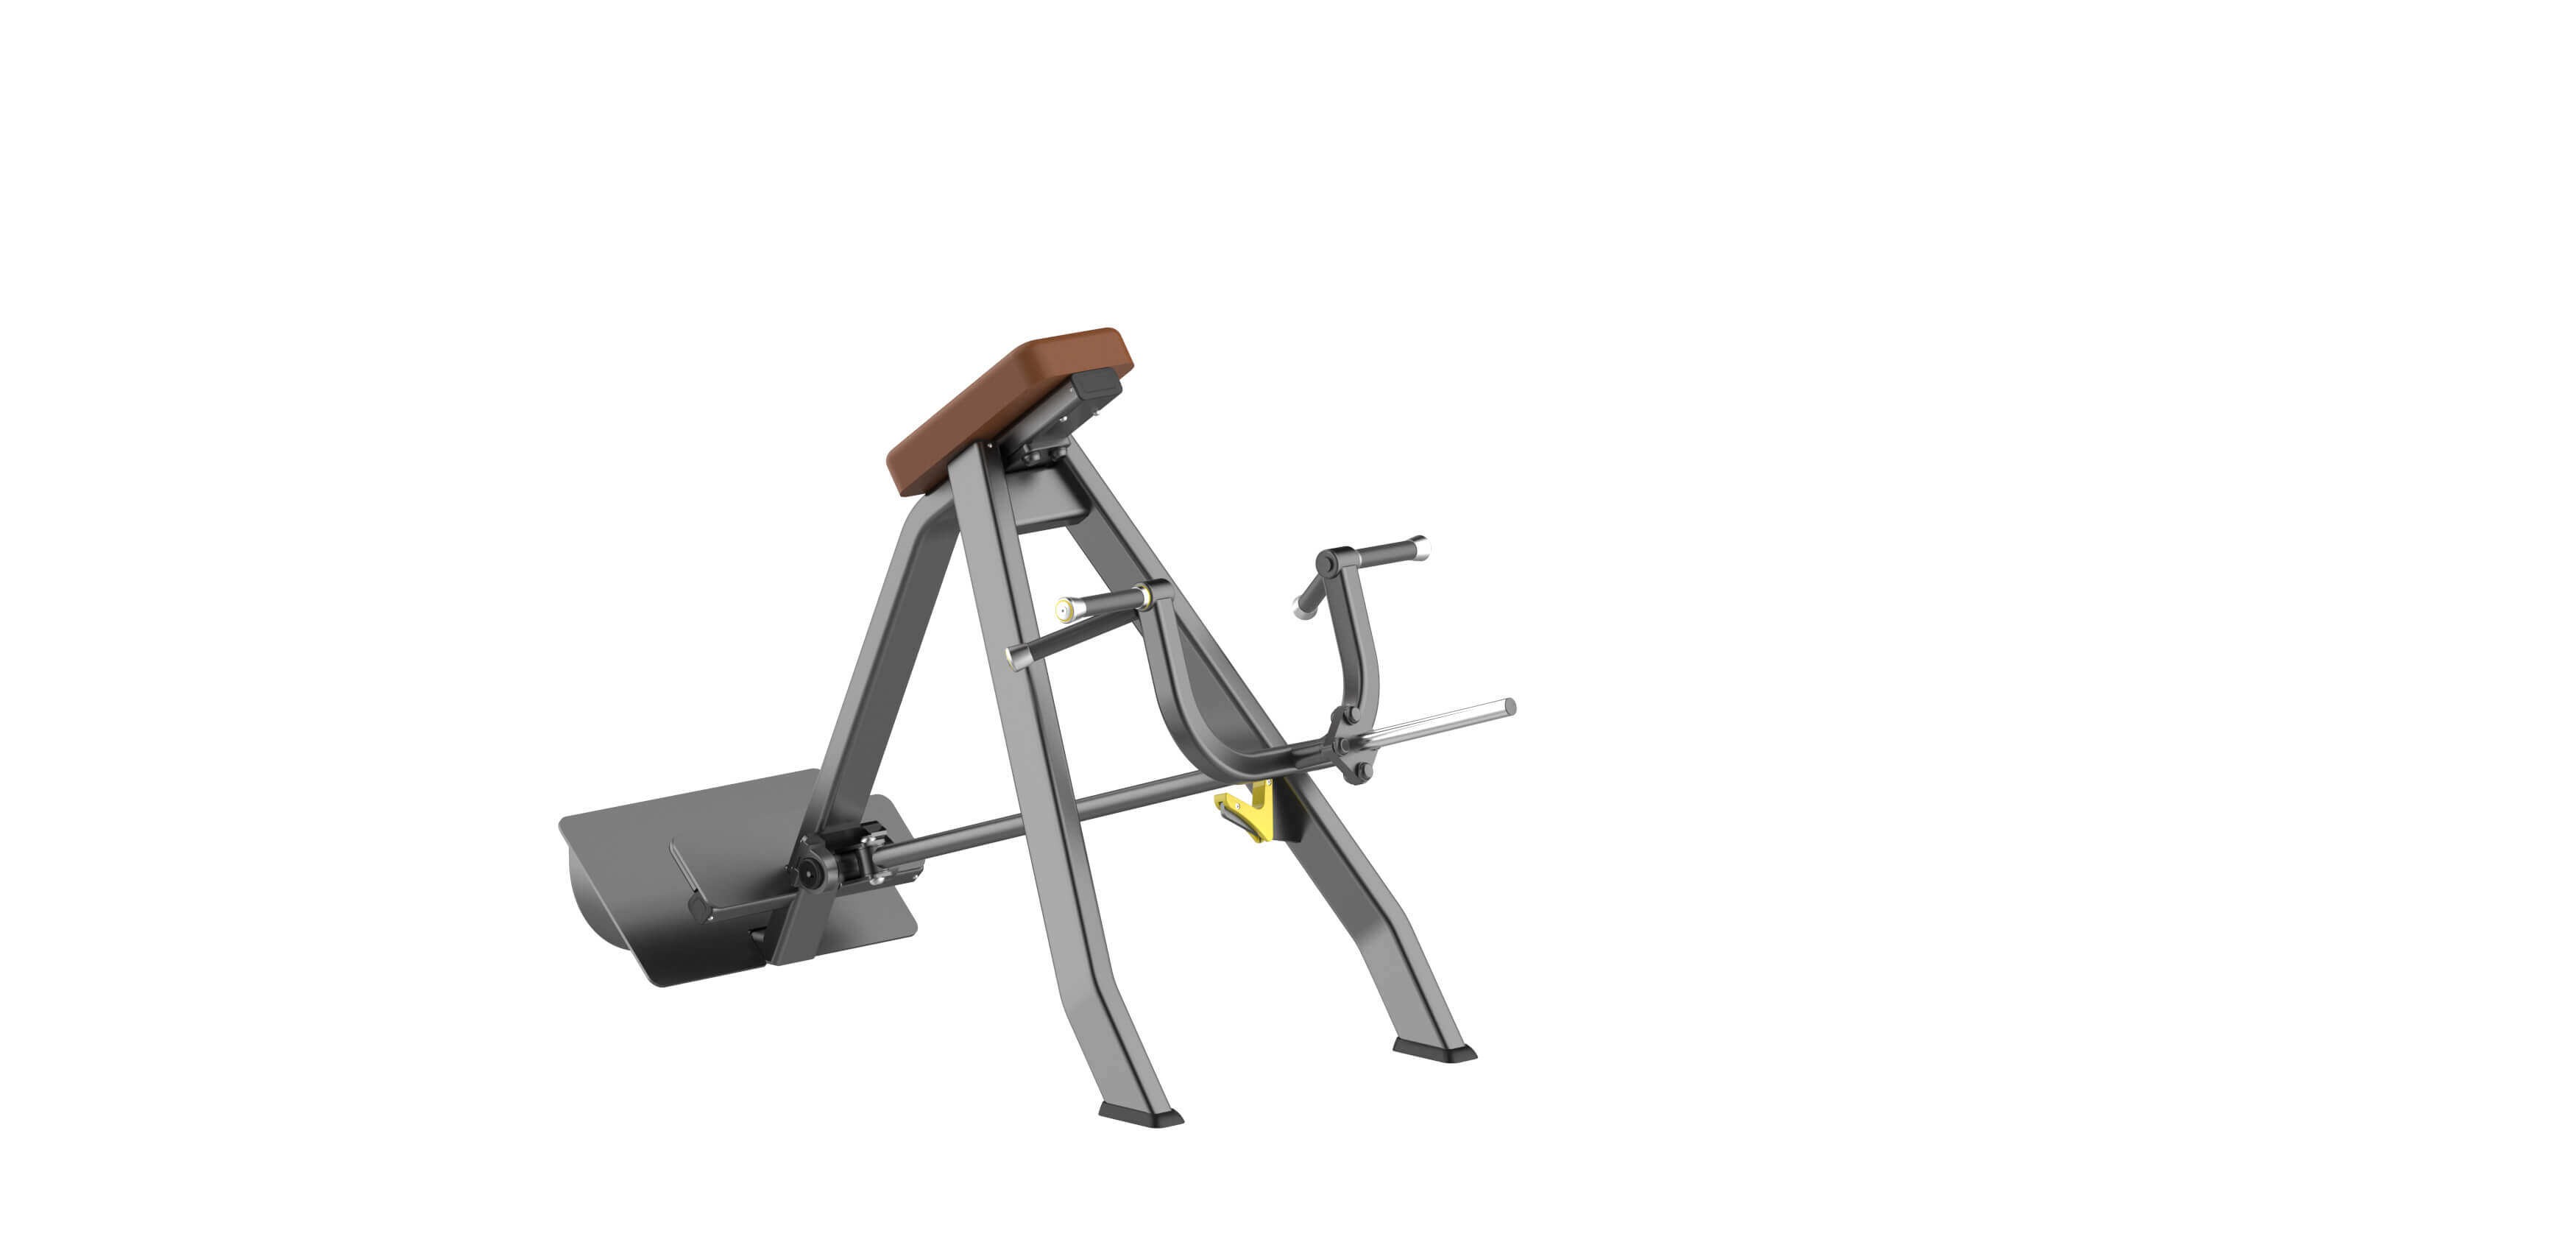 wholesale commercial gym fitness equipment manufacturers-SUPK